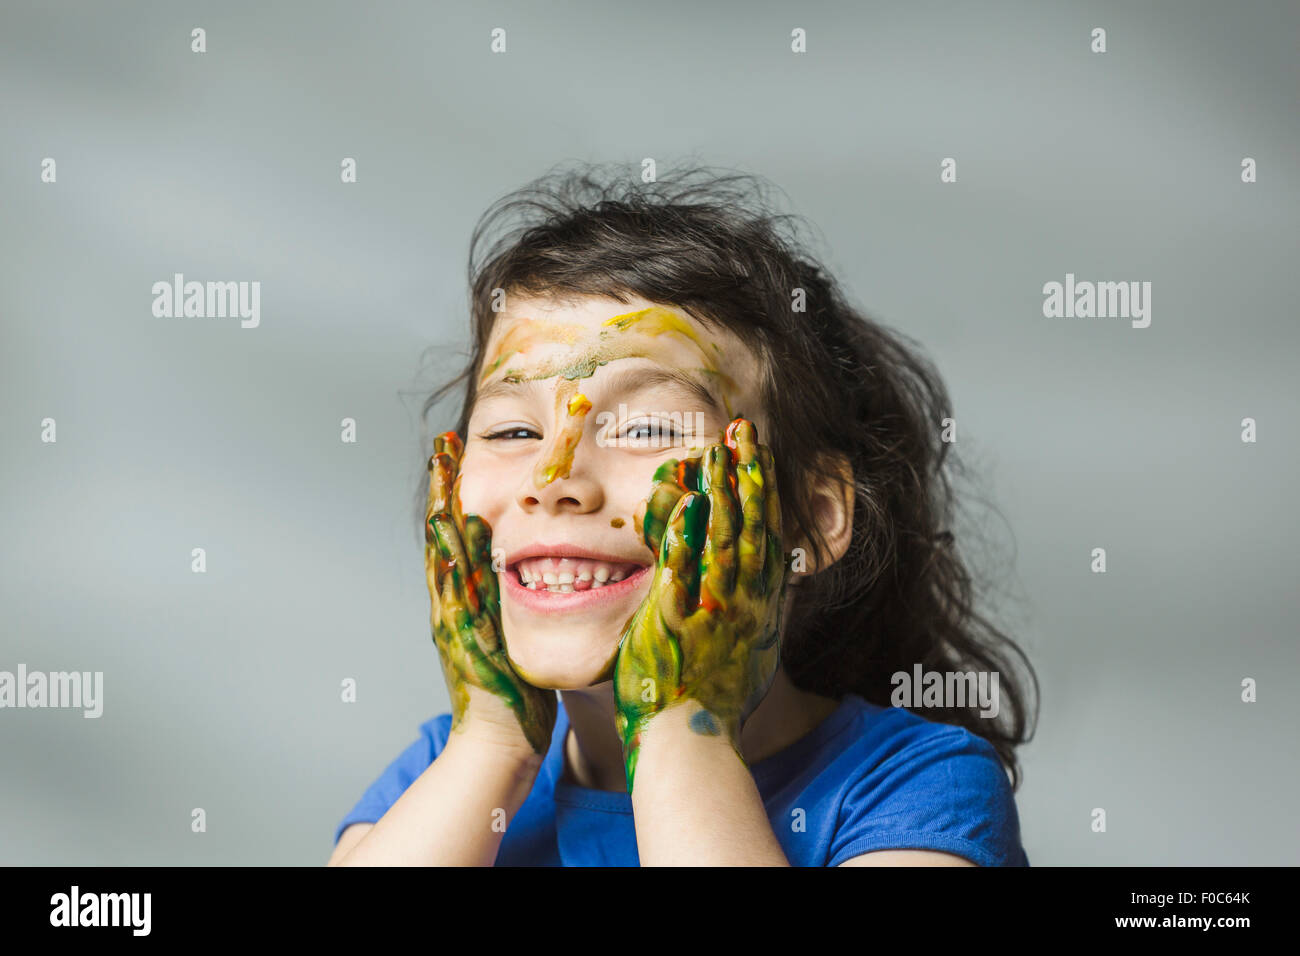 Smiling girl with painted face and hands over gray background Stock Photo